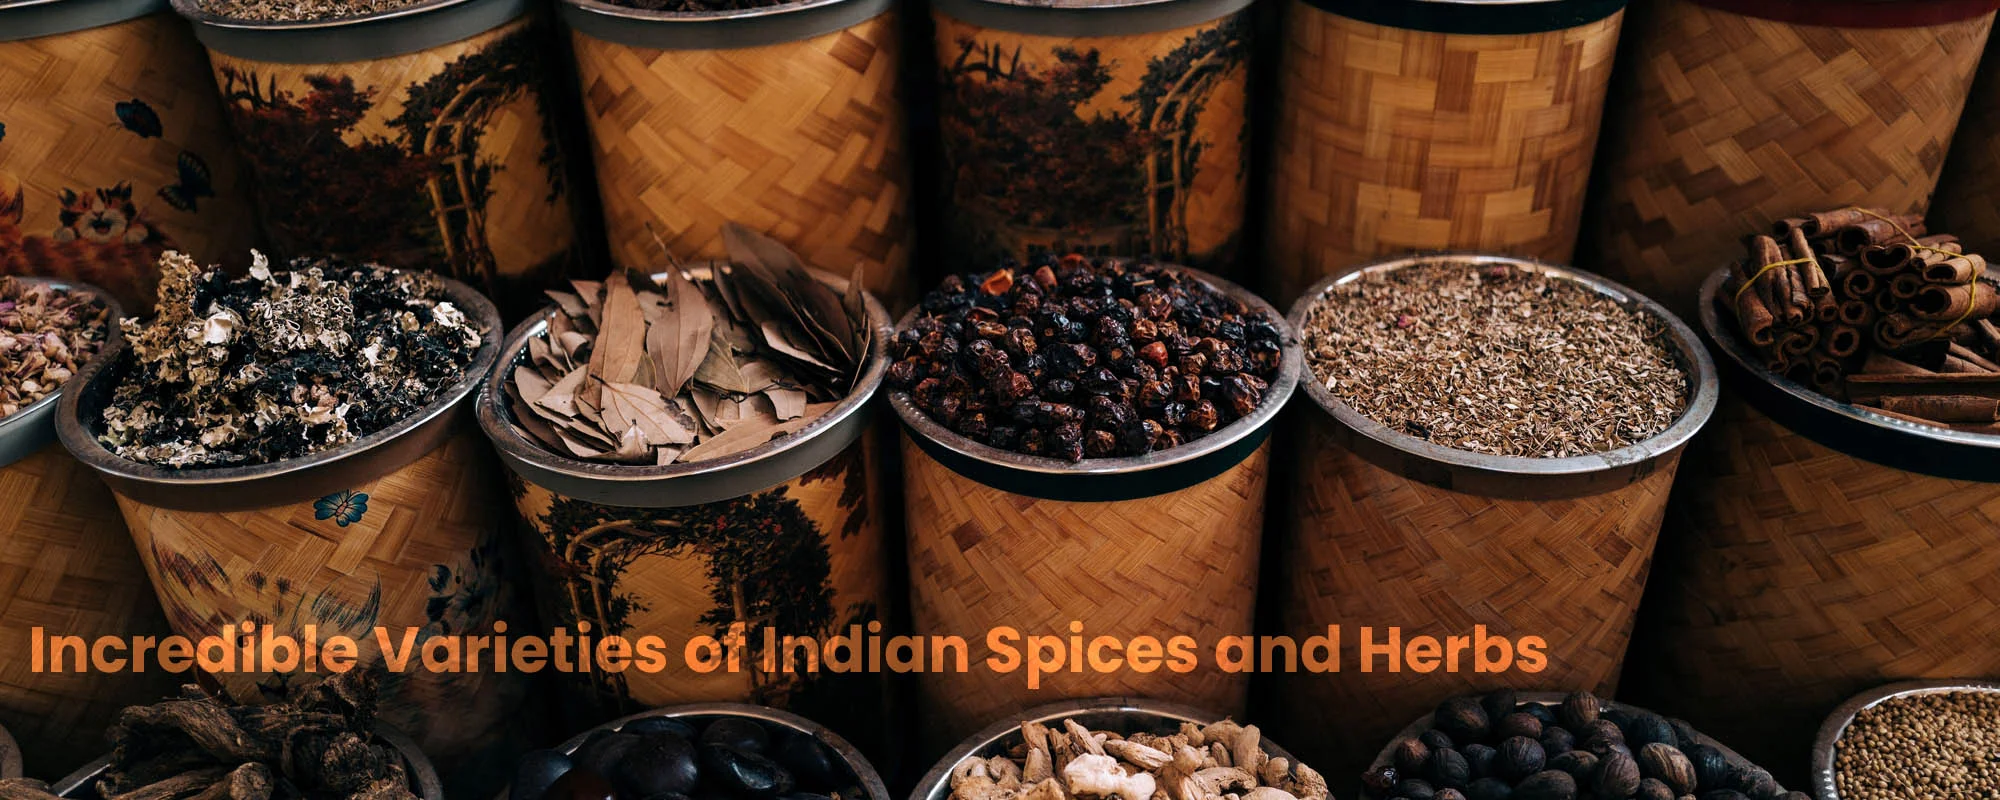 Incredible Varieties of Indian Spices and Herbs